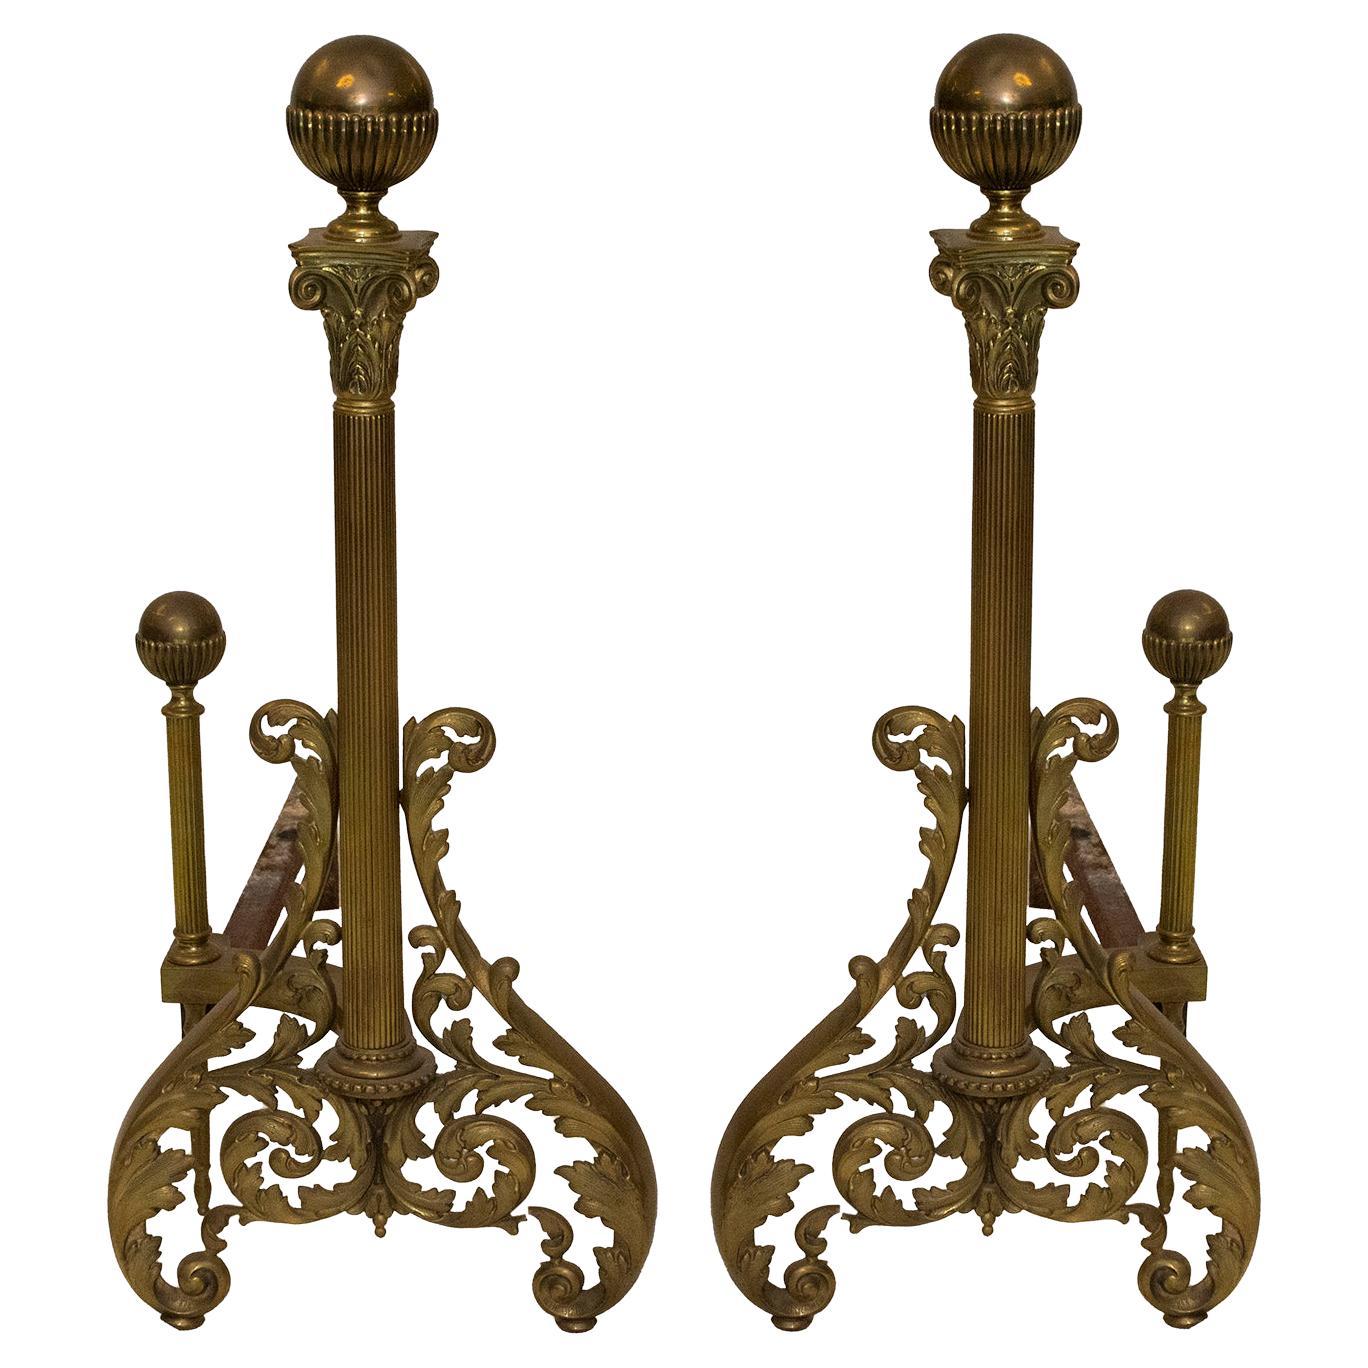 Decorative Vintage Neoclassical-Inspired Brass and Iron Andirons For Sale